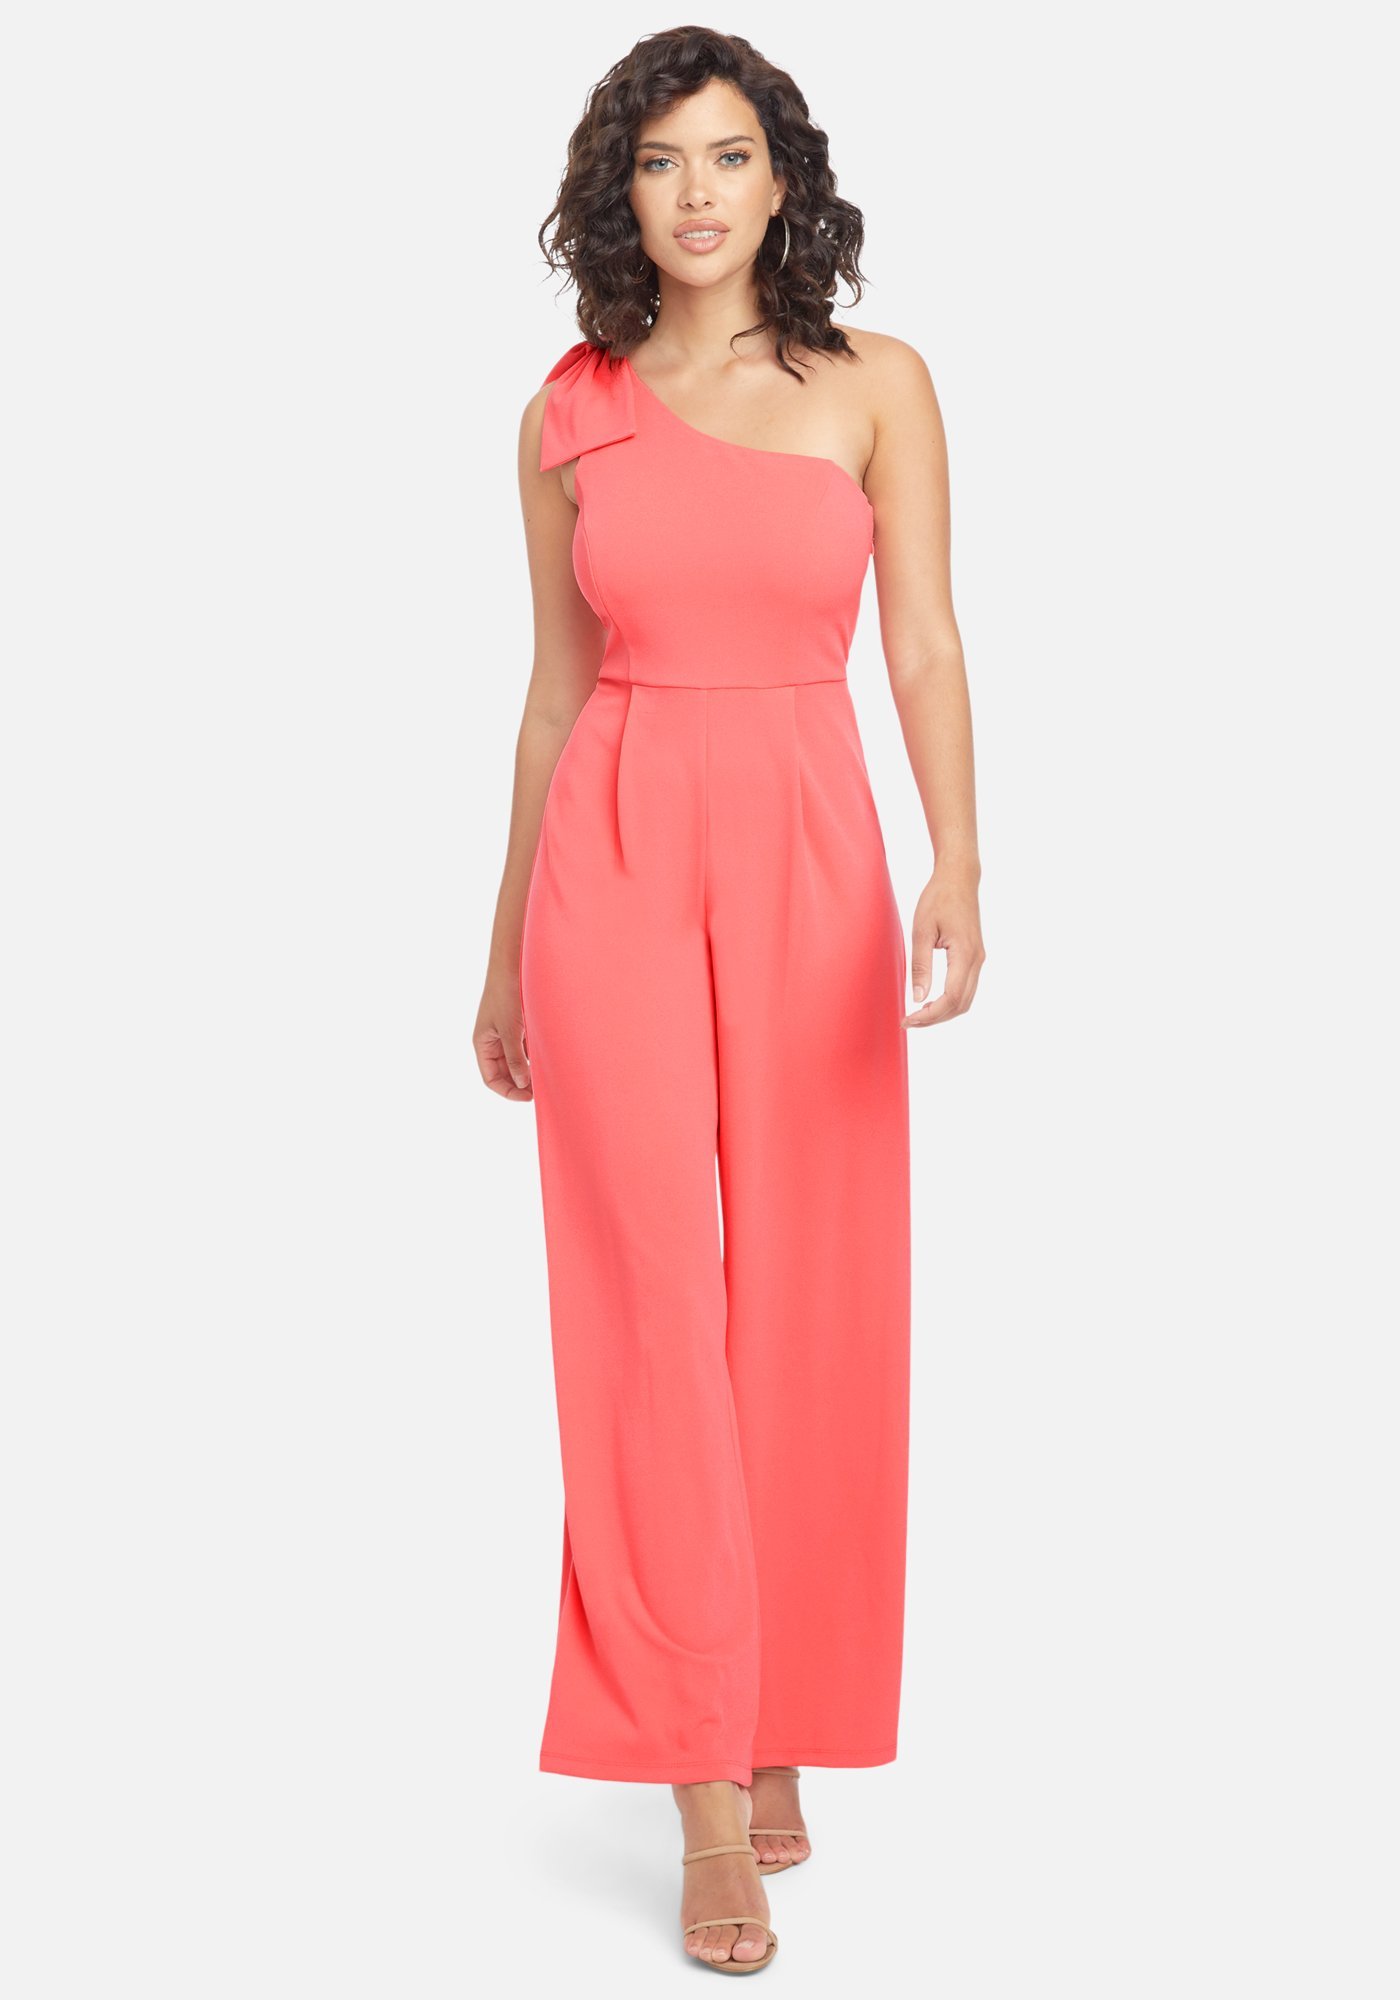 Bebe Women's One Shoulder Bow Jumpsuit, Size 8 in Coral Polyester/Spandex